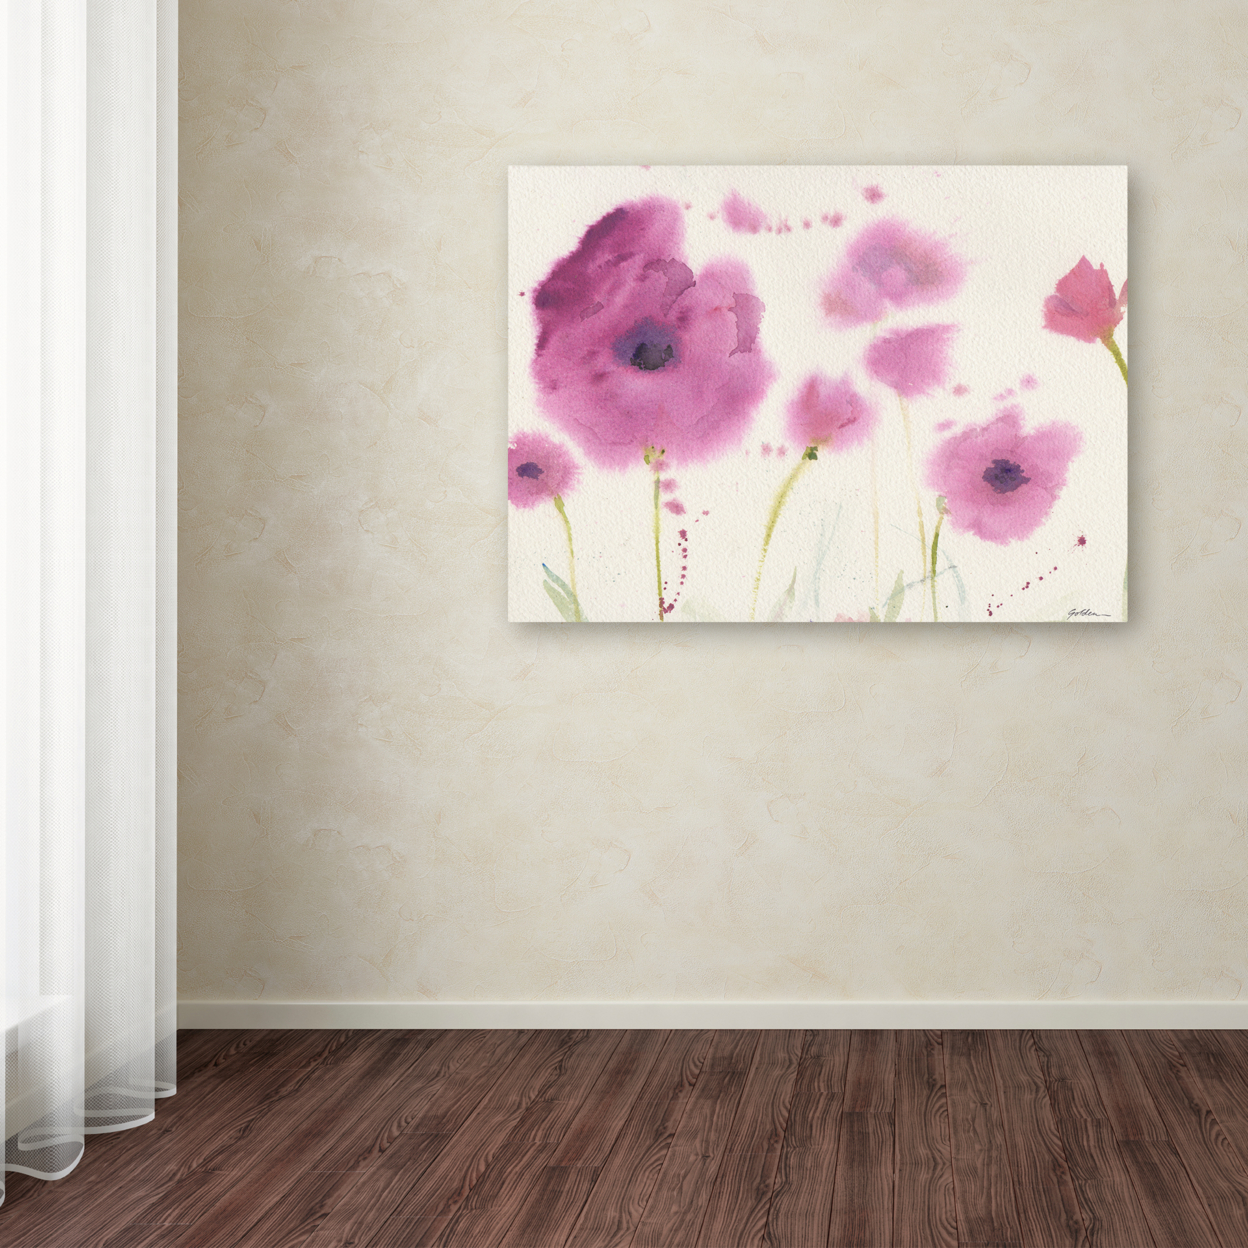 Sheila Golden 'Purple Poppies' Canvas Wall Art 35 X 47 Inches